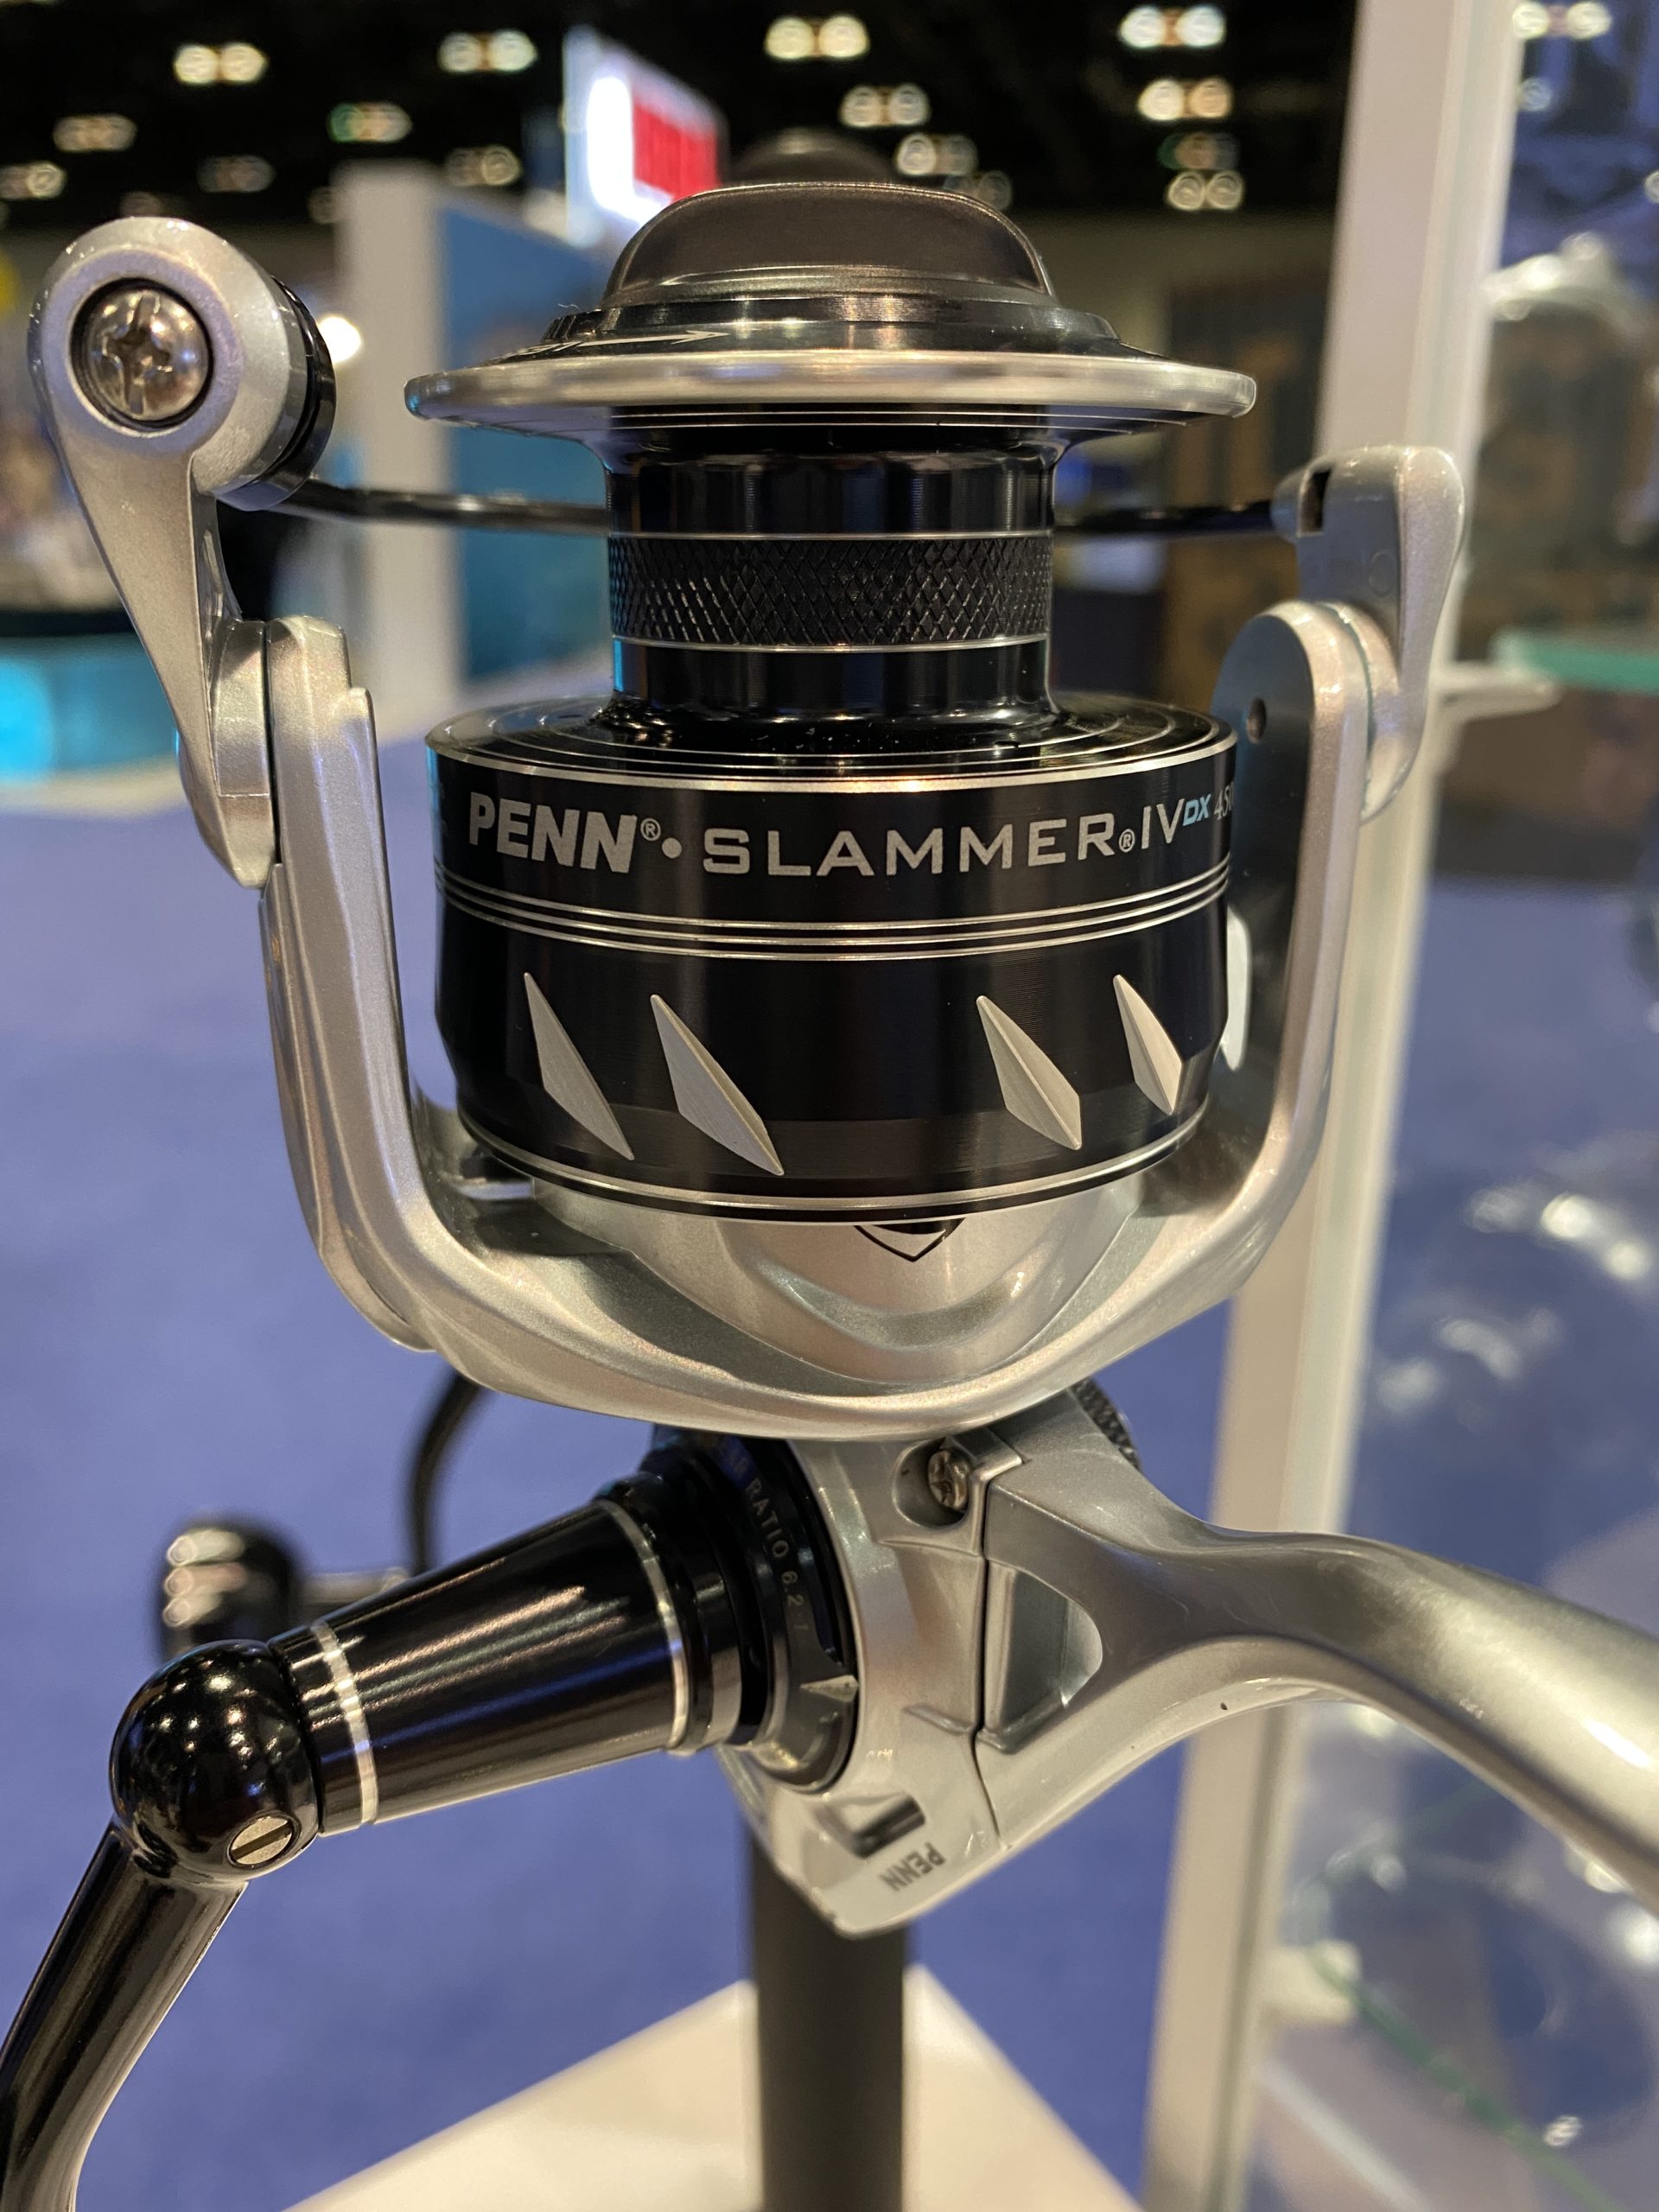 NEW Penn Slammer IV DX Initial Review - WATCH THIS BEFORE YOU BUY